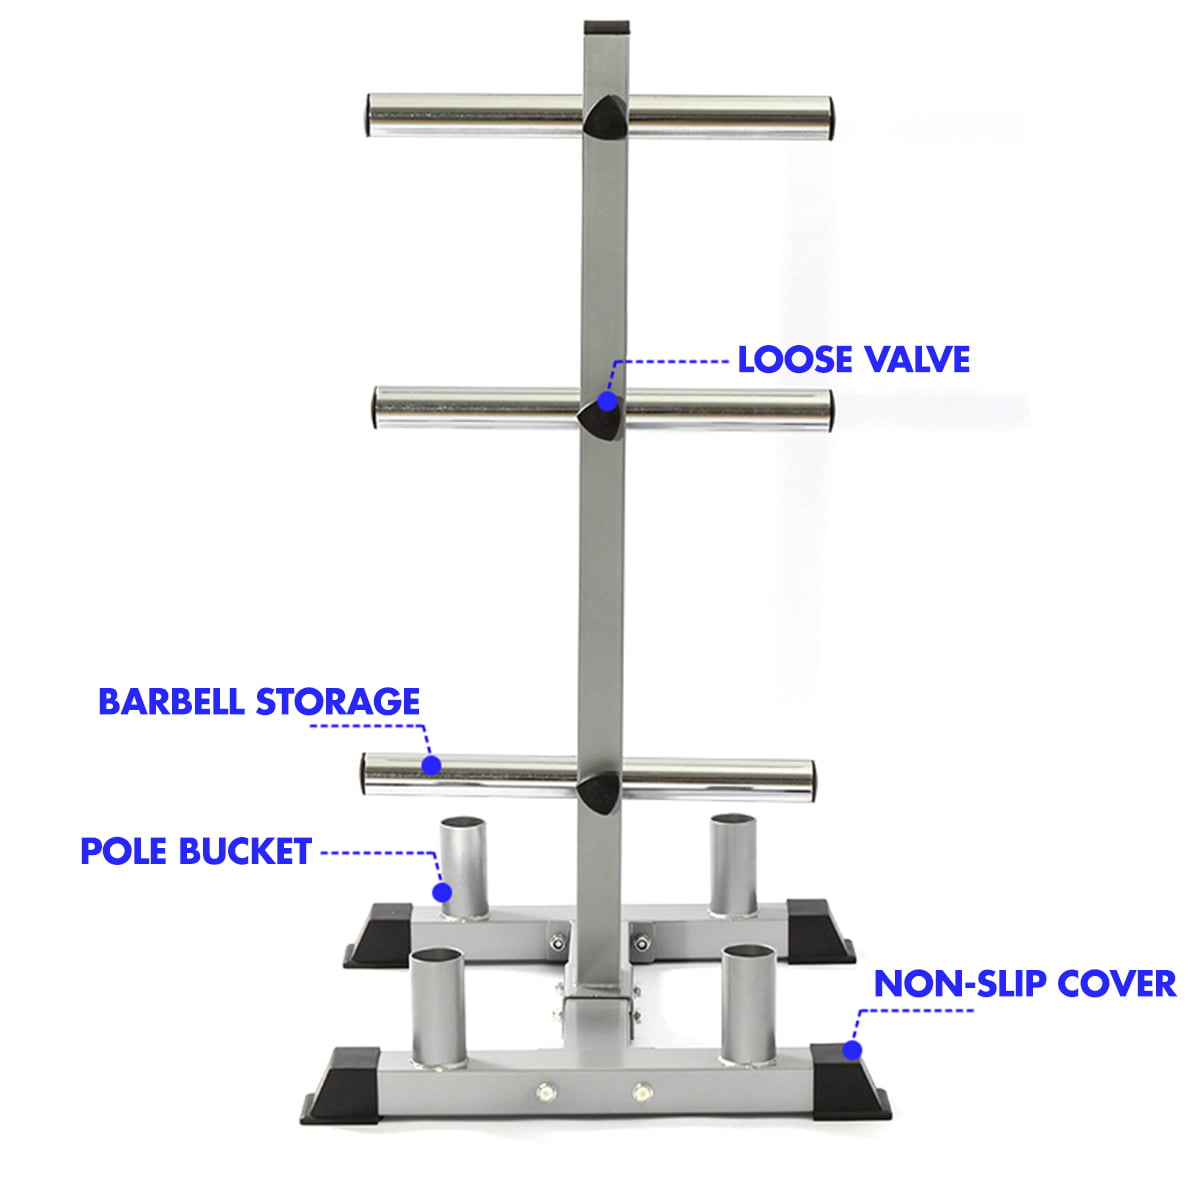 Free-Standing Sturdy Plate Racks Stand with 6 Pegs for Weighted Plates and Barbells Gym Equipment Accessories Weight Rack and 2 Bar Holder for 2” Olympic Plates by D1F Stores Up To 850 lb